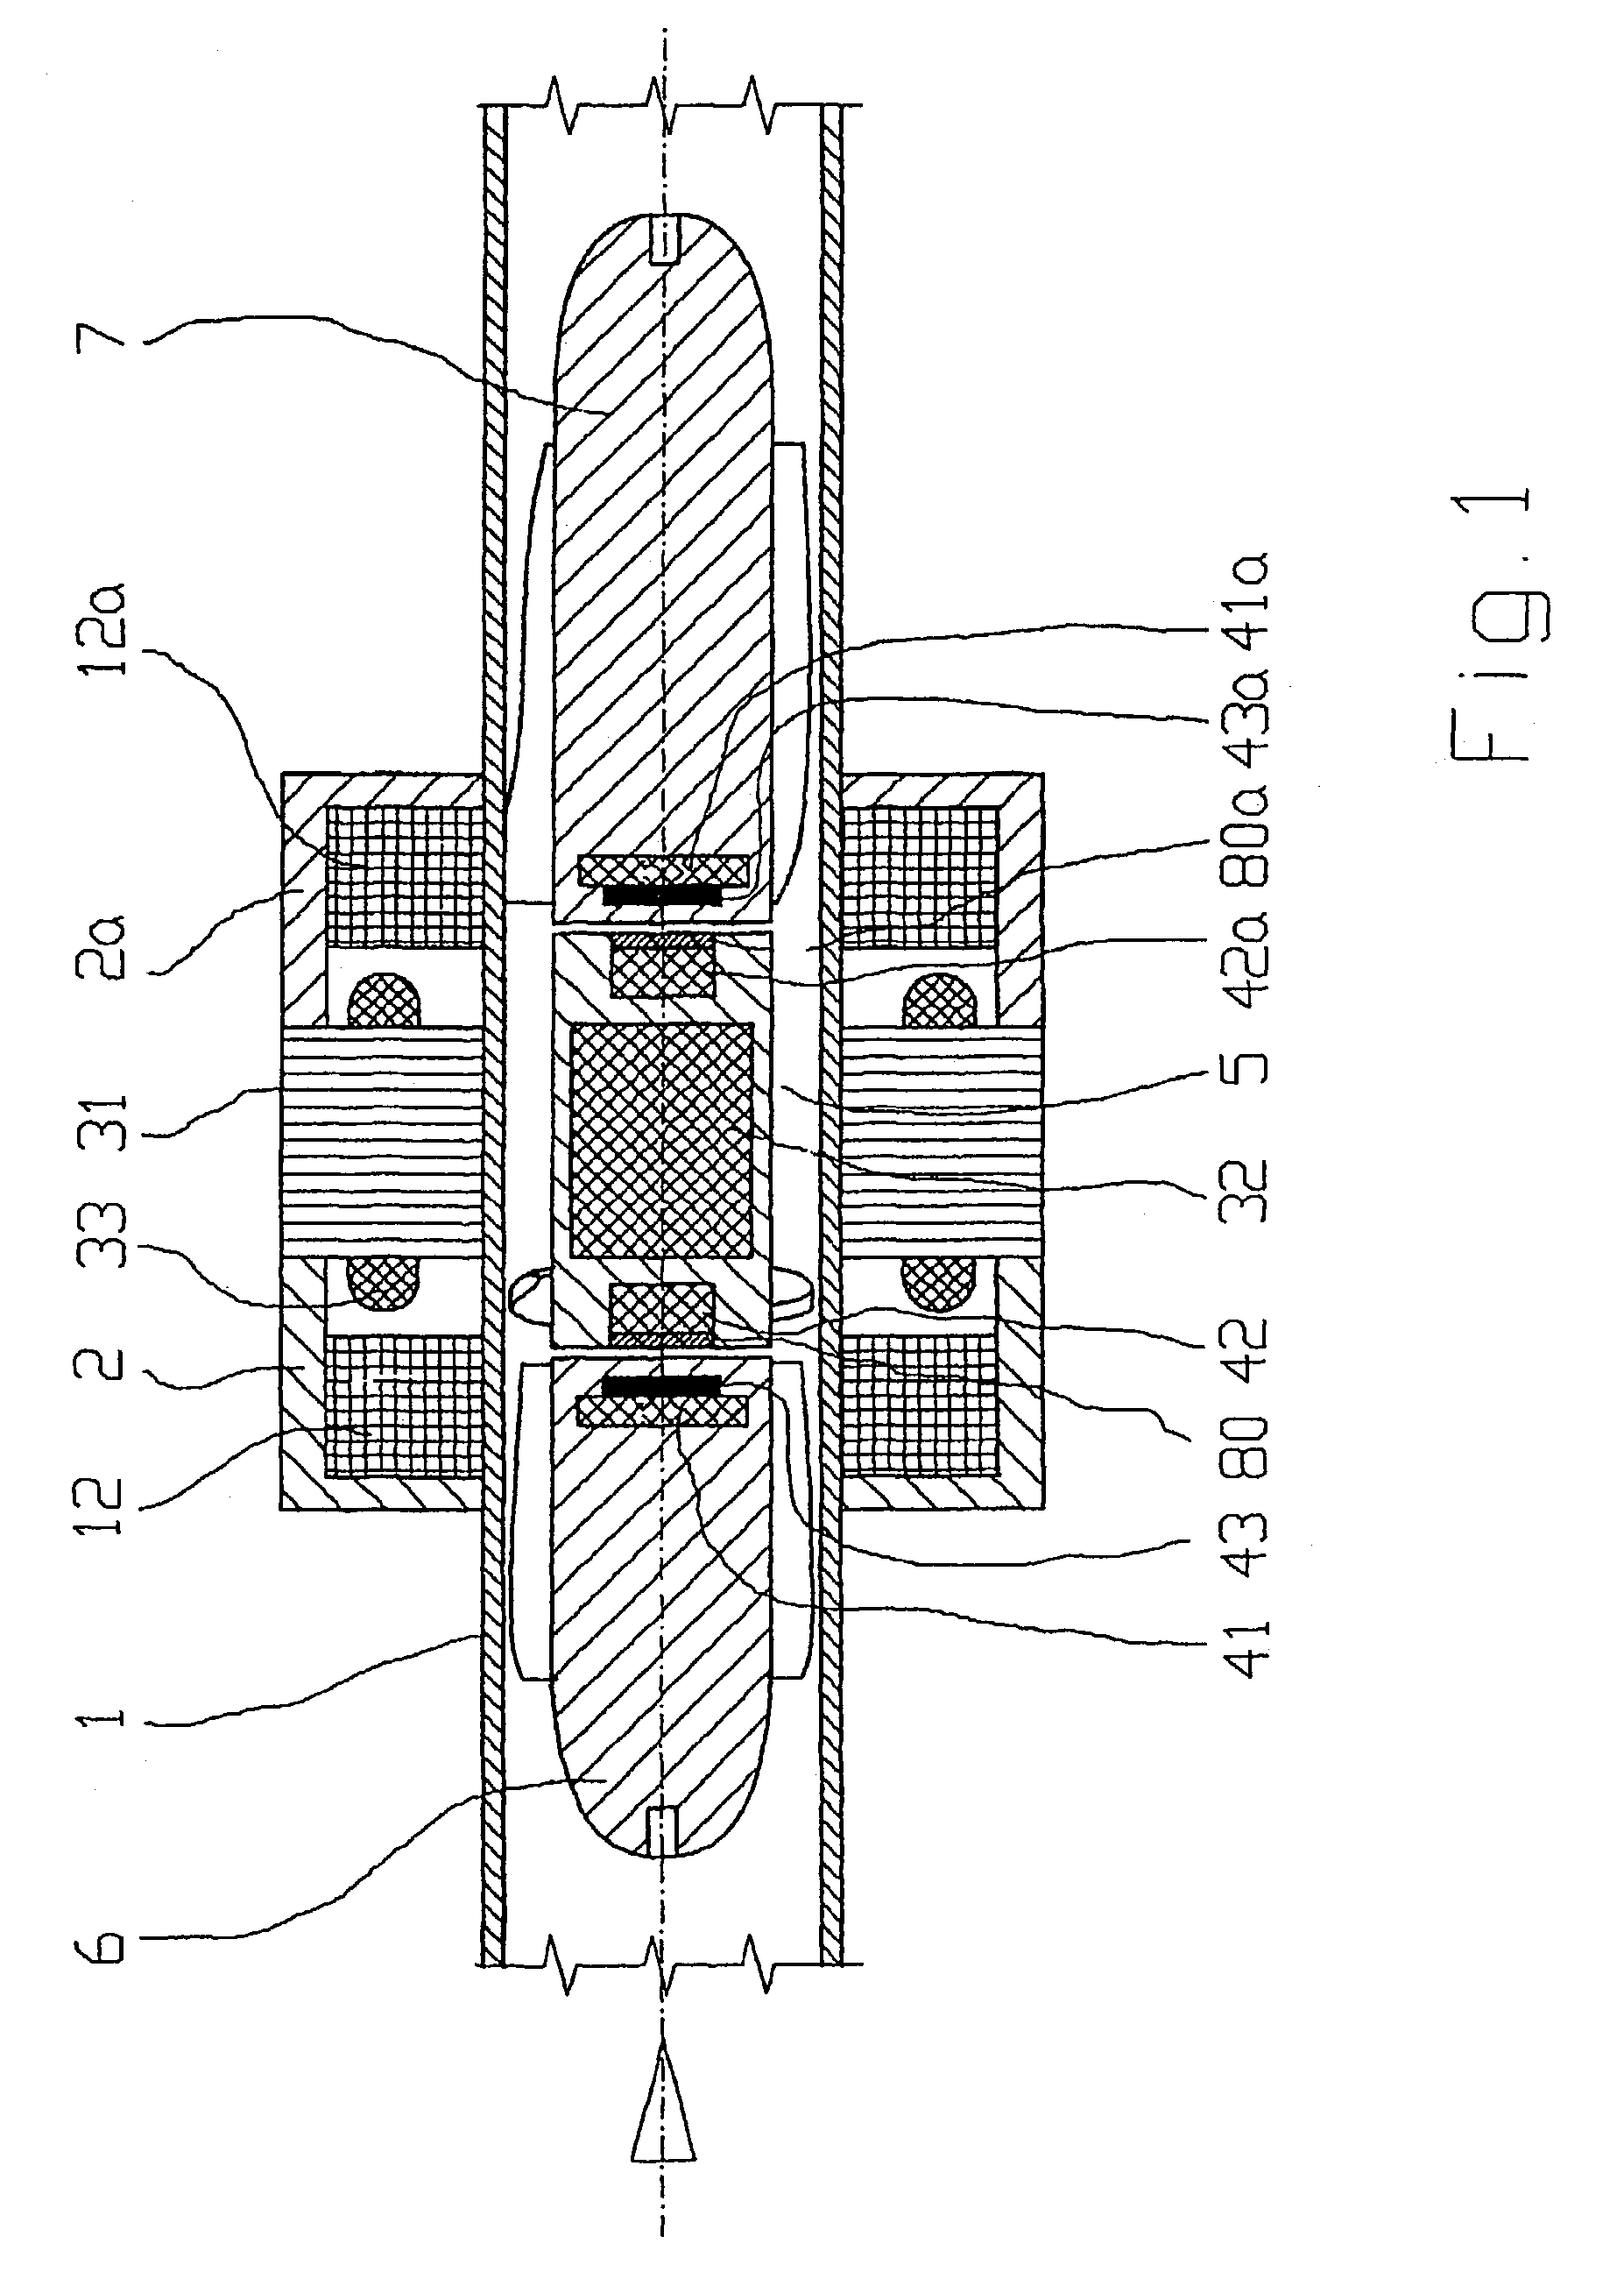 Method for controlling the position of a permanent magnetically supported rotating component